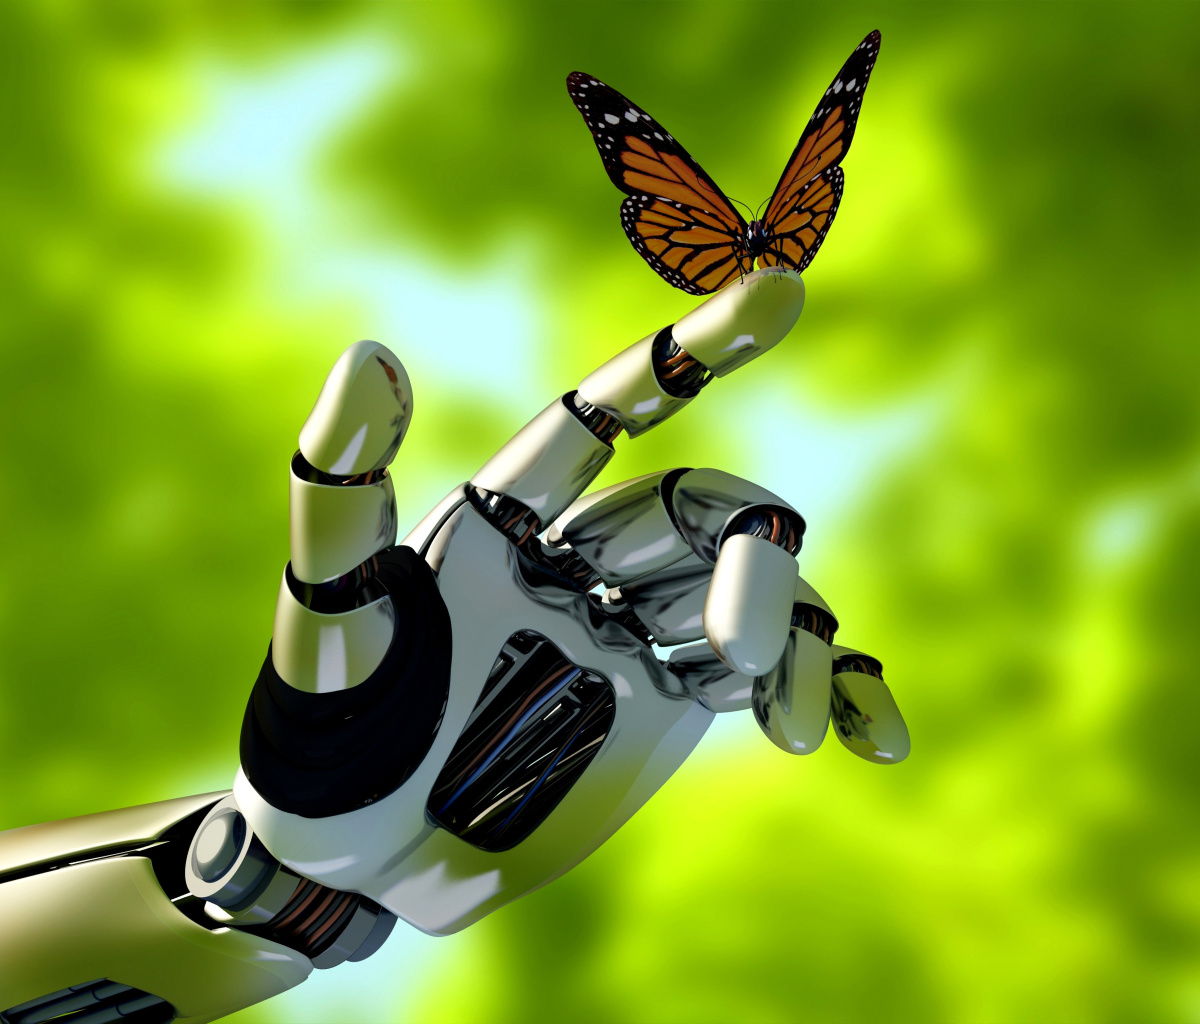 Robot hand and butterfly wallpaper 1200x1024